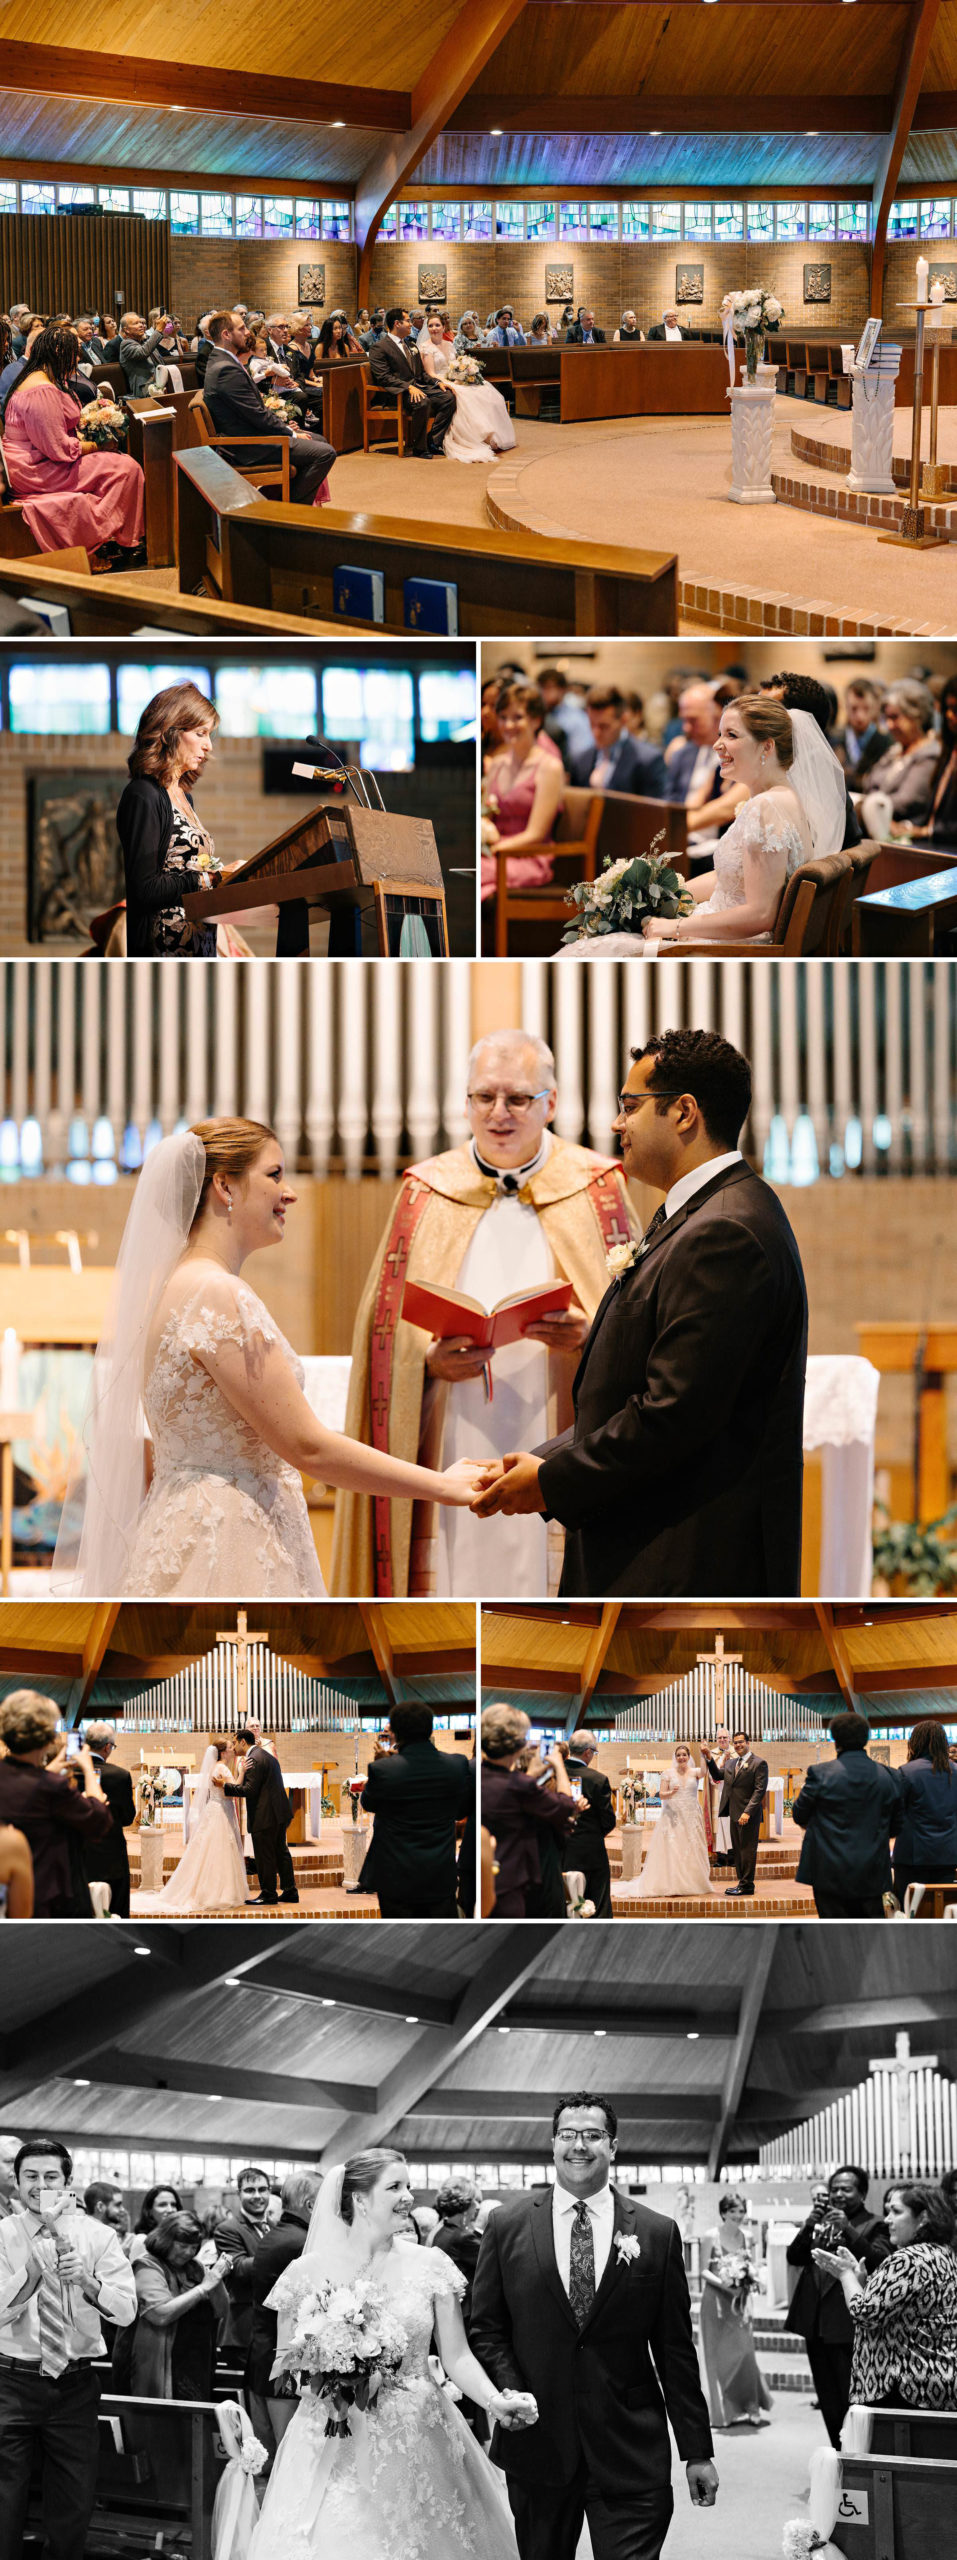 Bride and groom sit at front of church in front of the stage; woman gives wedding charge at the podium; bride and groom smile from the pews; bride and groom hold hands and look at each other during the ceremony; faraway shot of bride and groom embracing in the church during ceremony; faraway shot of bride and groom holding hands about to exit the ceremony; black and white photo of bride and groom walking back down the aisle by Detroit Wedding Photographer Michele Maloney 